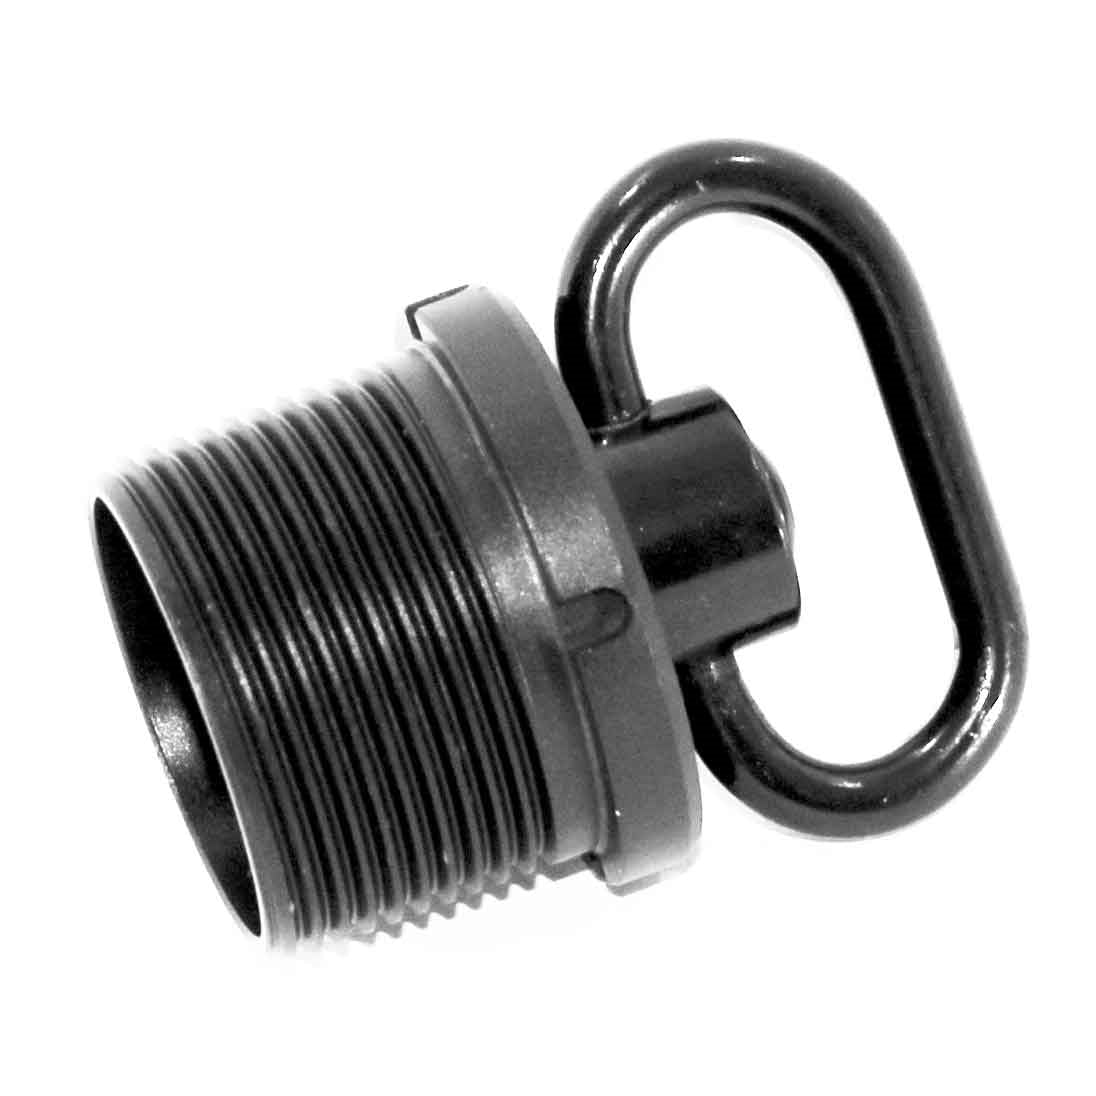 Trinity Swing Swivel End Cap For Mossberg 500 Grip Aluminum Black Hunting Tactical Accessory.